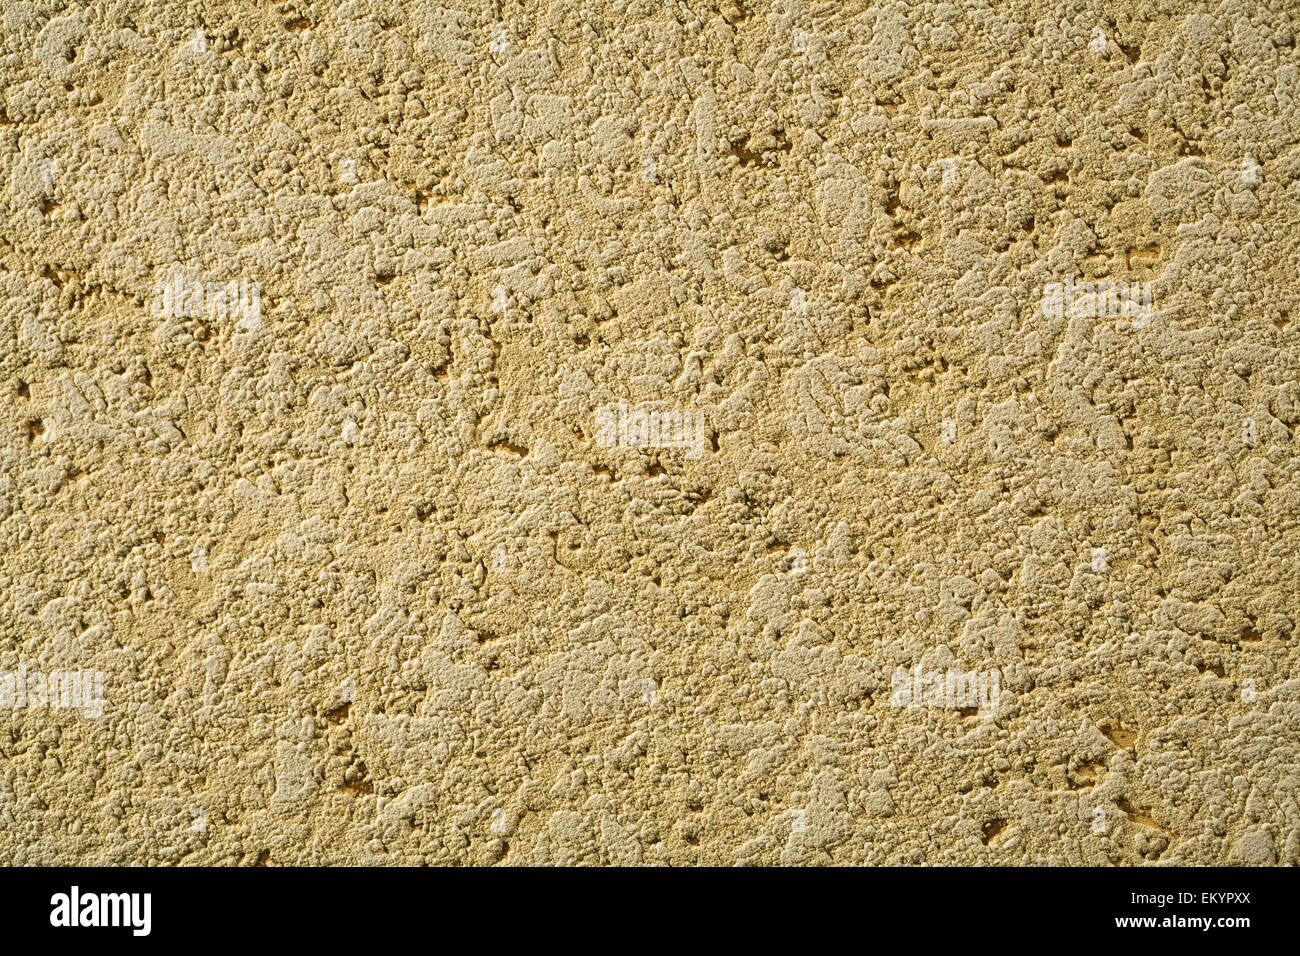 texture of abstract beige material Stock Photo